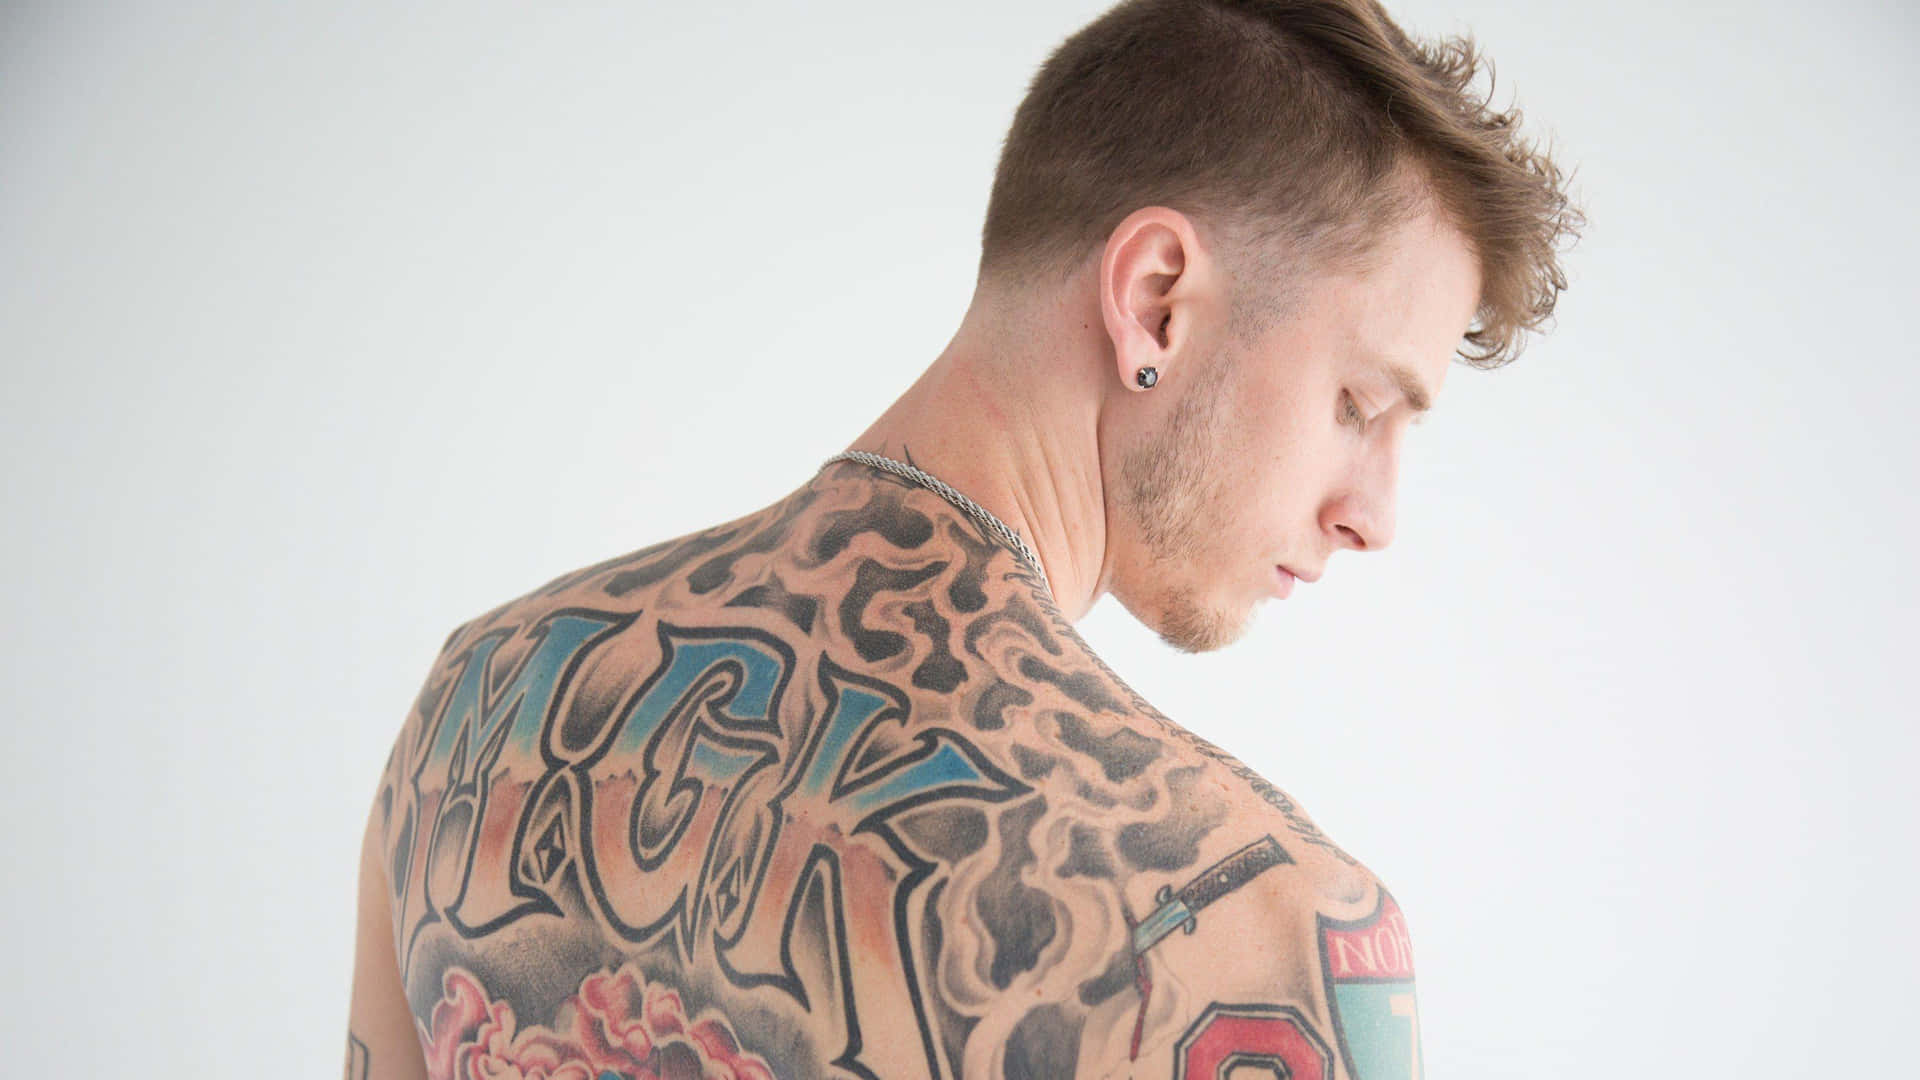 Mgk Showing His Back Wallpaper